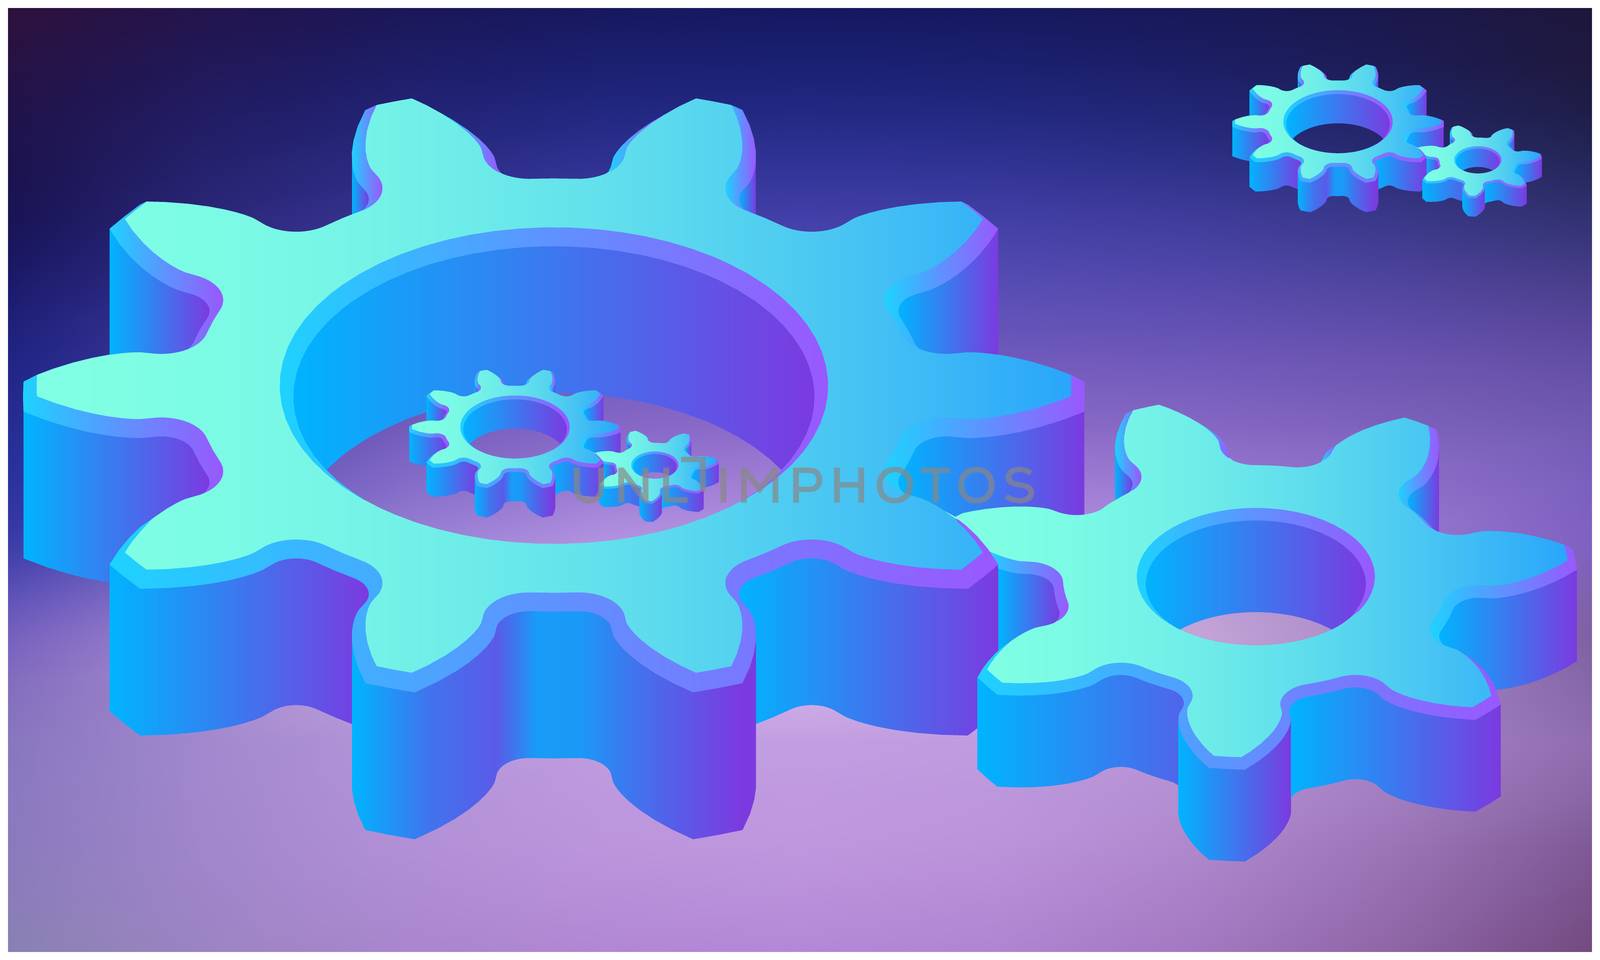 digital textile design of gears on abstract background